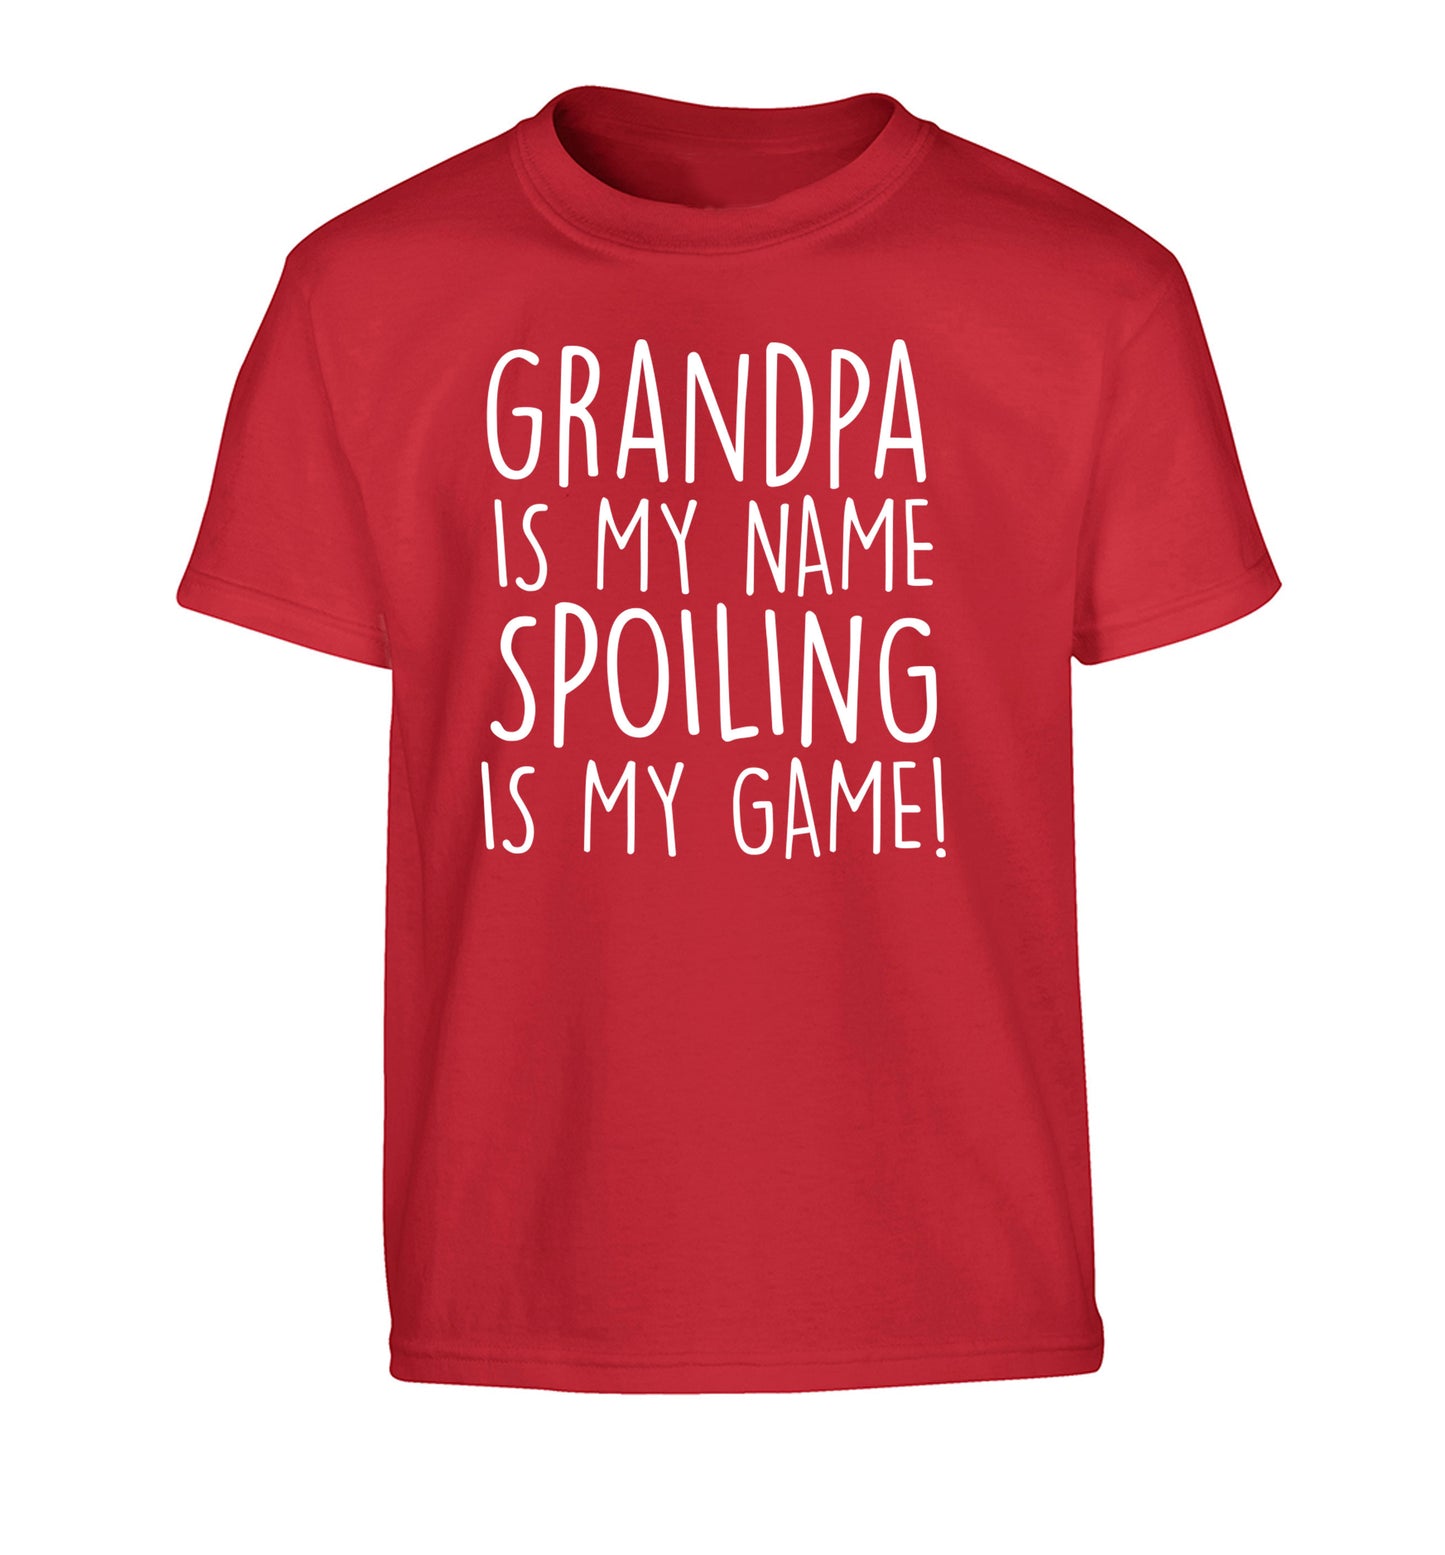 Grandpa is my name, spoiling is my game Children's red Tshirt 12-14 Years